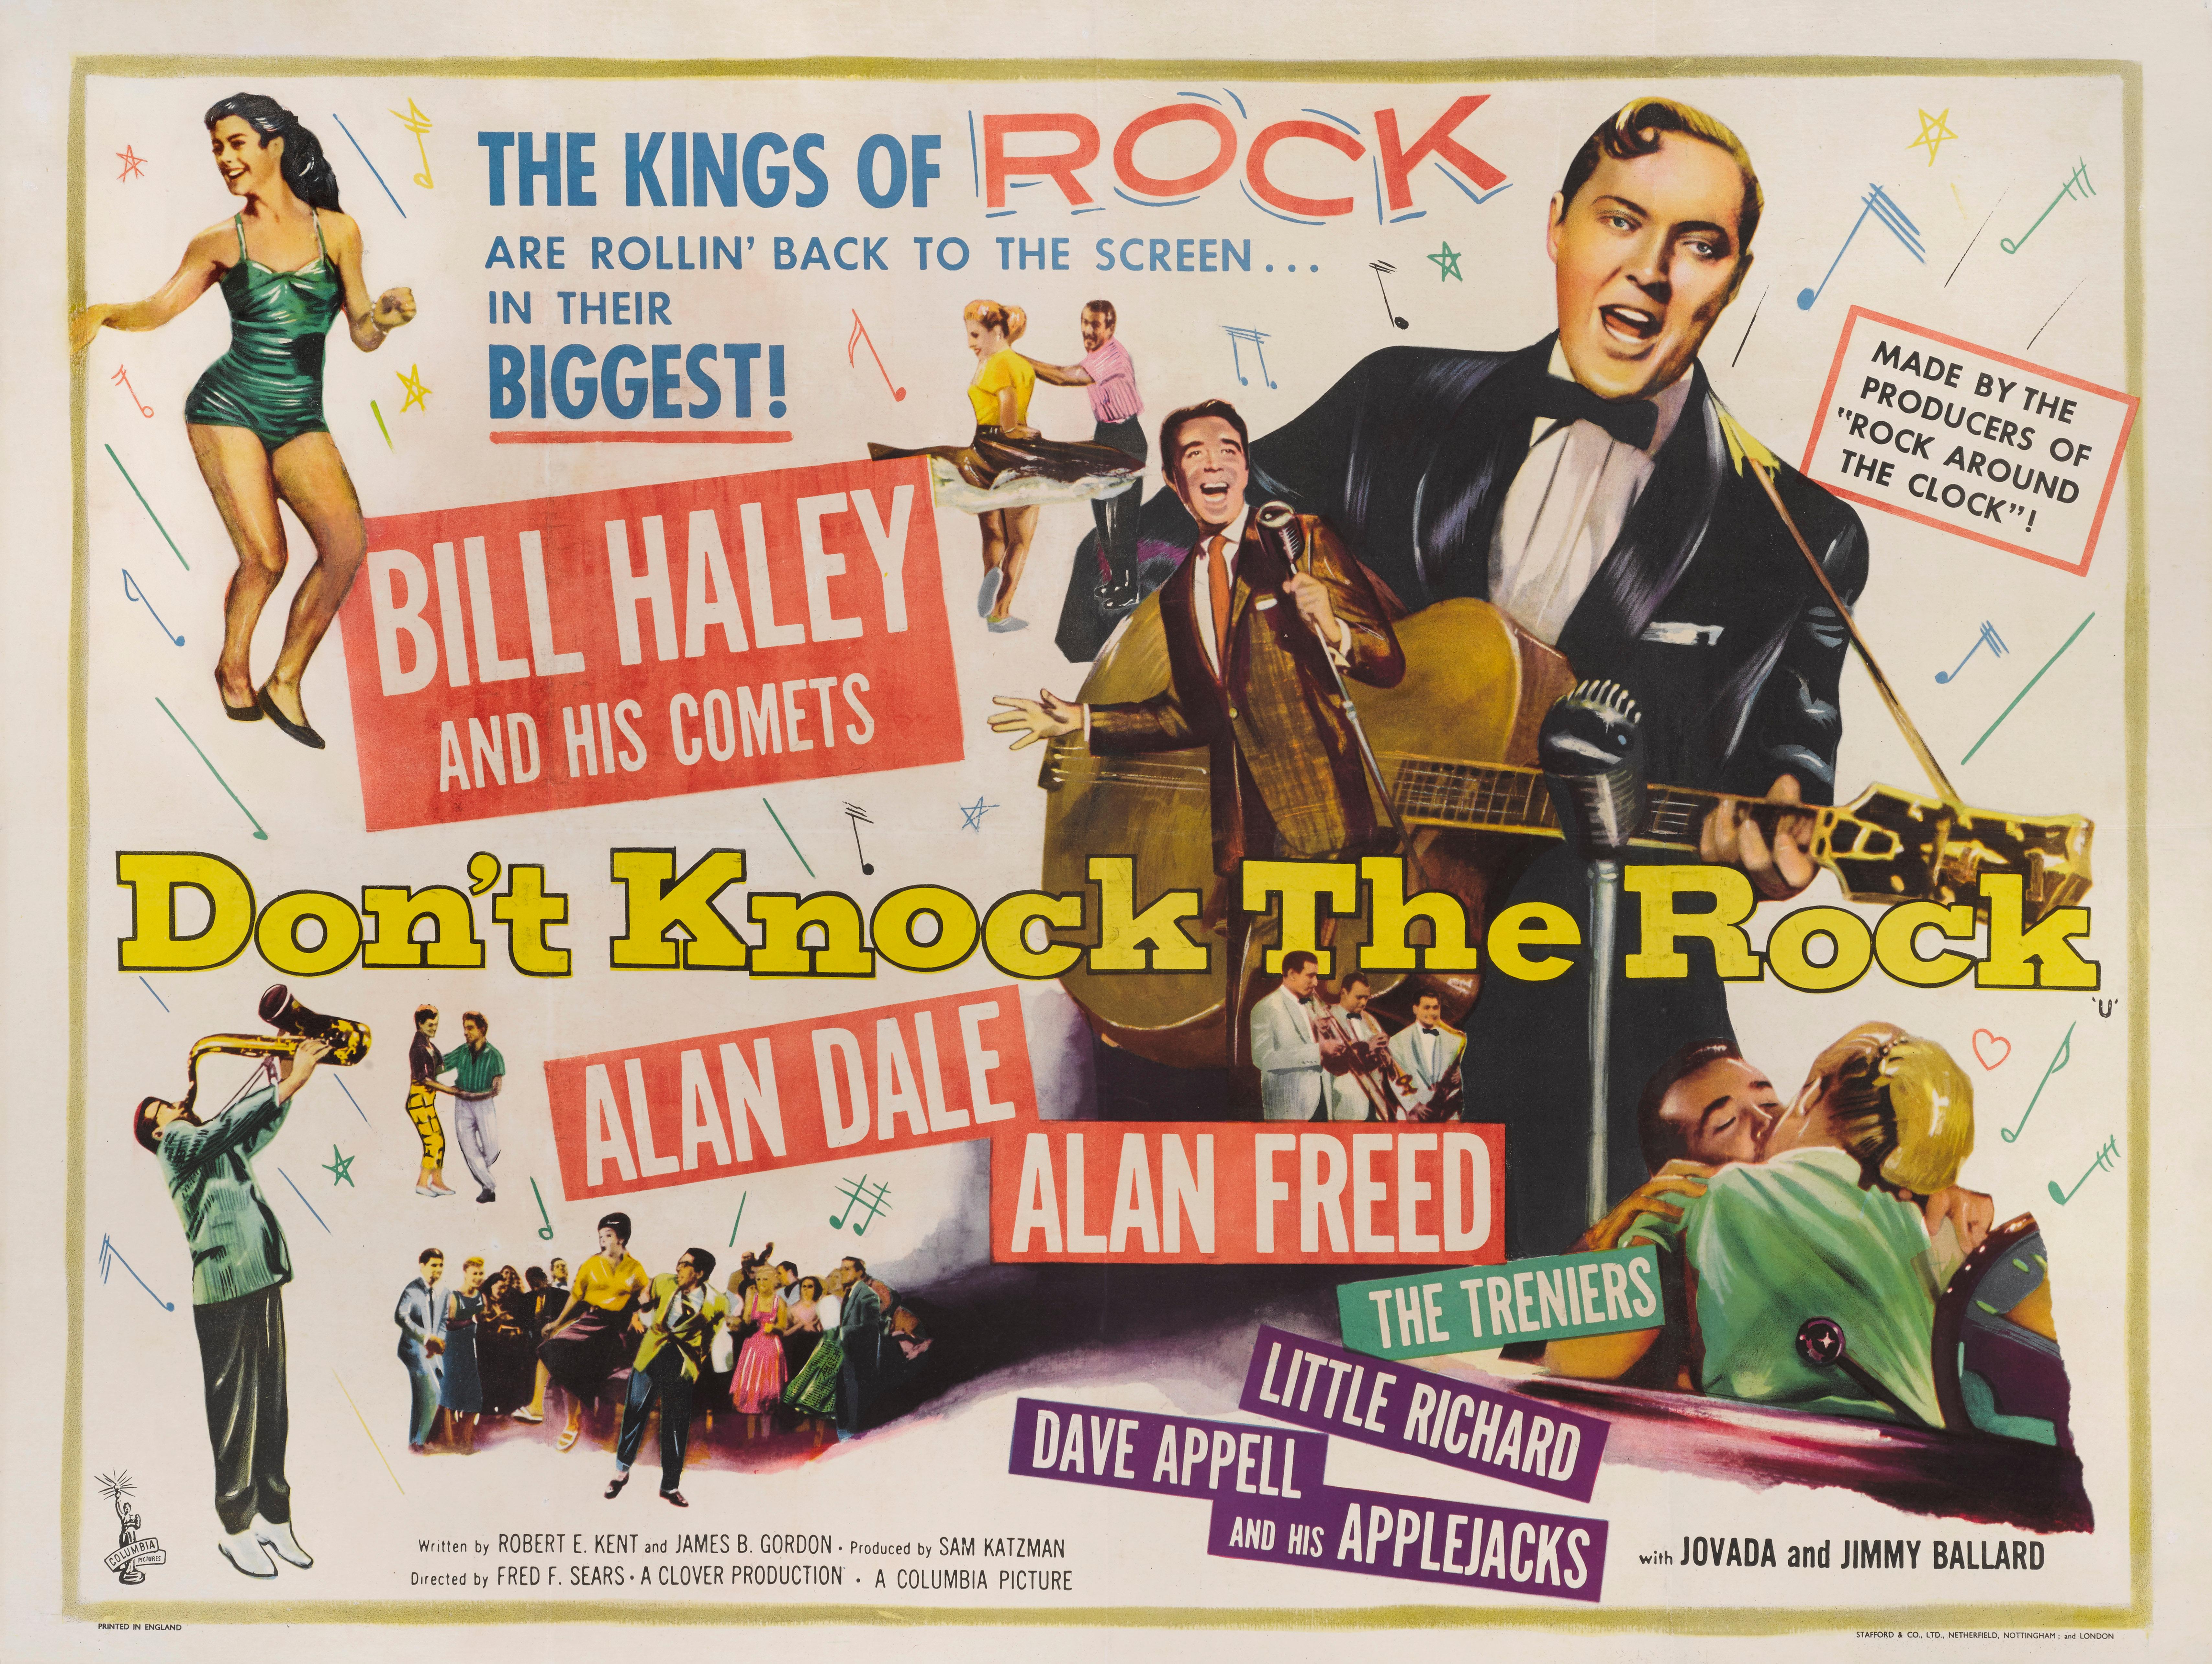 Original British film poster for the 1956 Rock and Roll film Don't Knock the Rock.
Starring Bill Hayley and the Comets, Alan Dale, Alan Freed. The poster is conservation linen backed and would be shipped rolled in a strong tube.